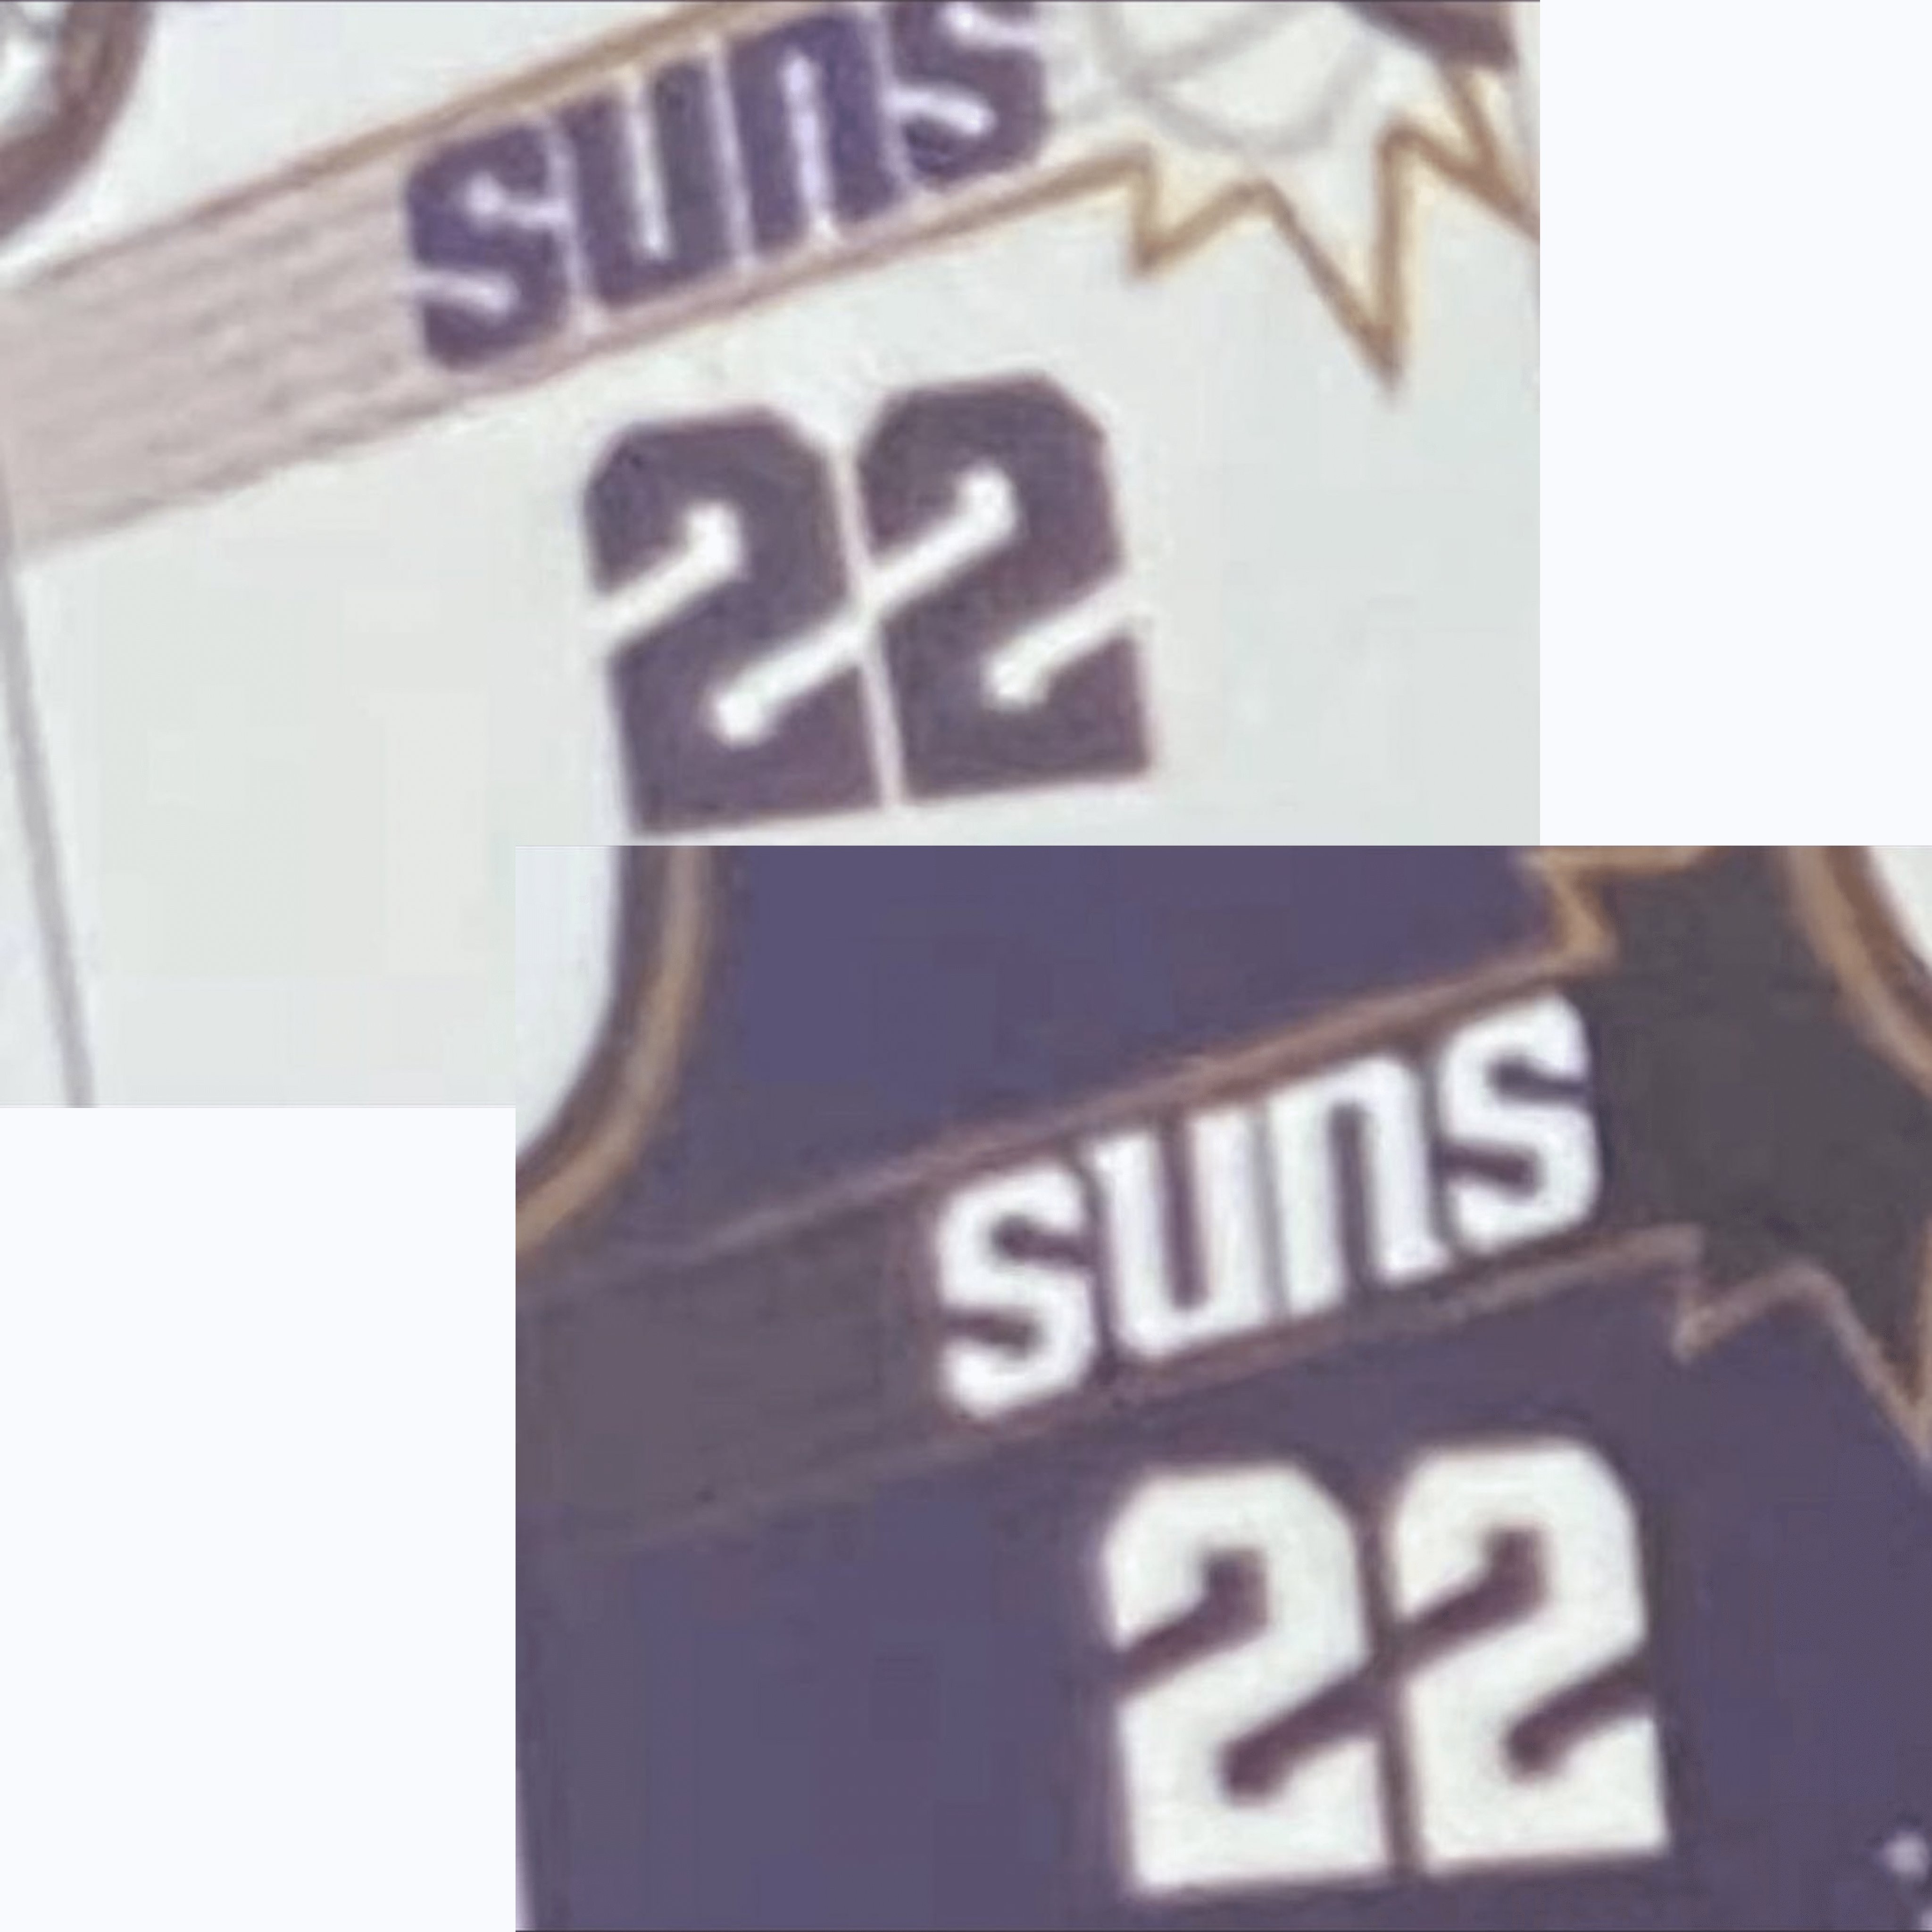 Suns Uniform Tracker on X: Let's do it again! Just Sports is matching the  last giveaway! Win a FREE City Edition Suns jersey (up to $120, subject to  availability from Just Sports).